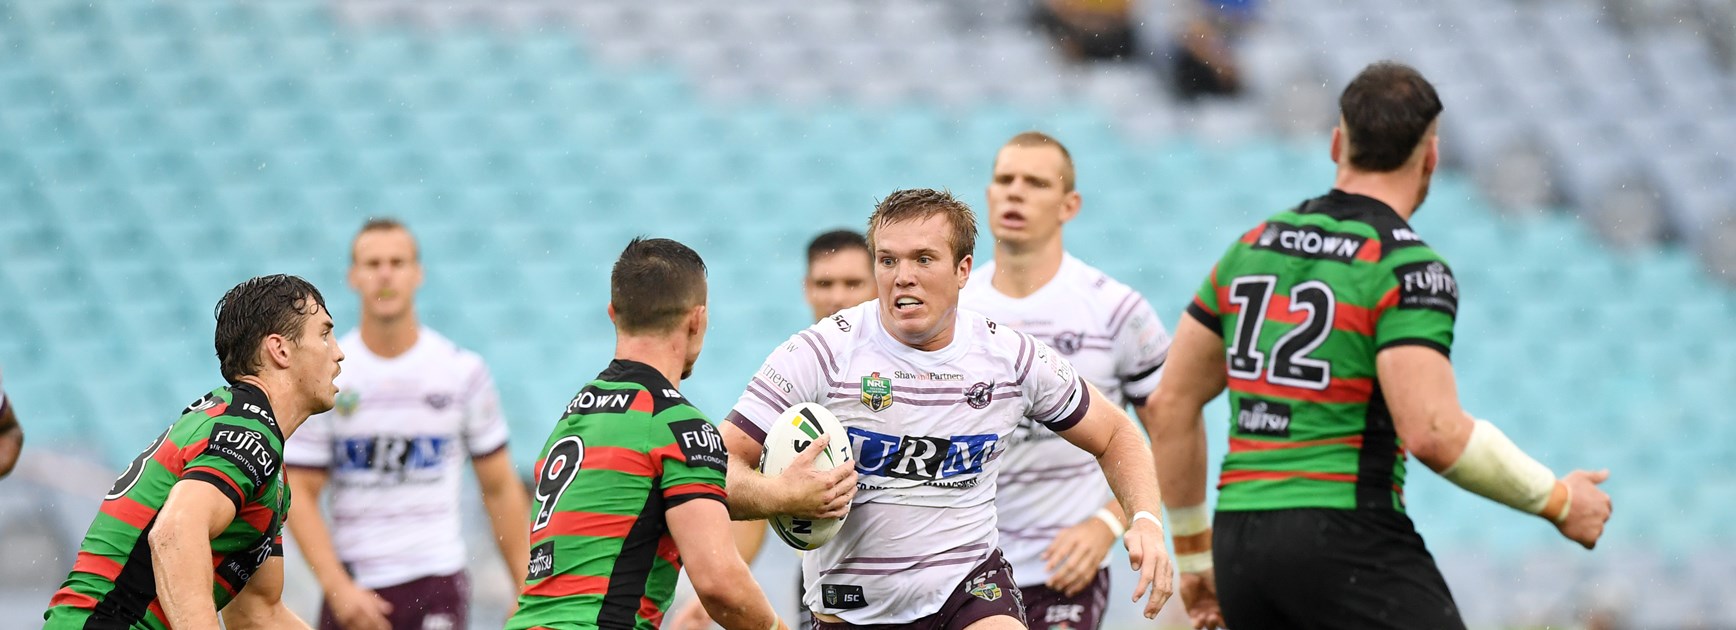 NRL match report: Manly lose 34-6 to Souths